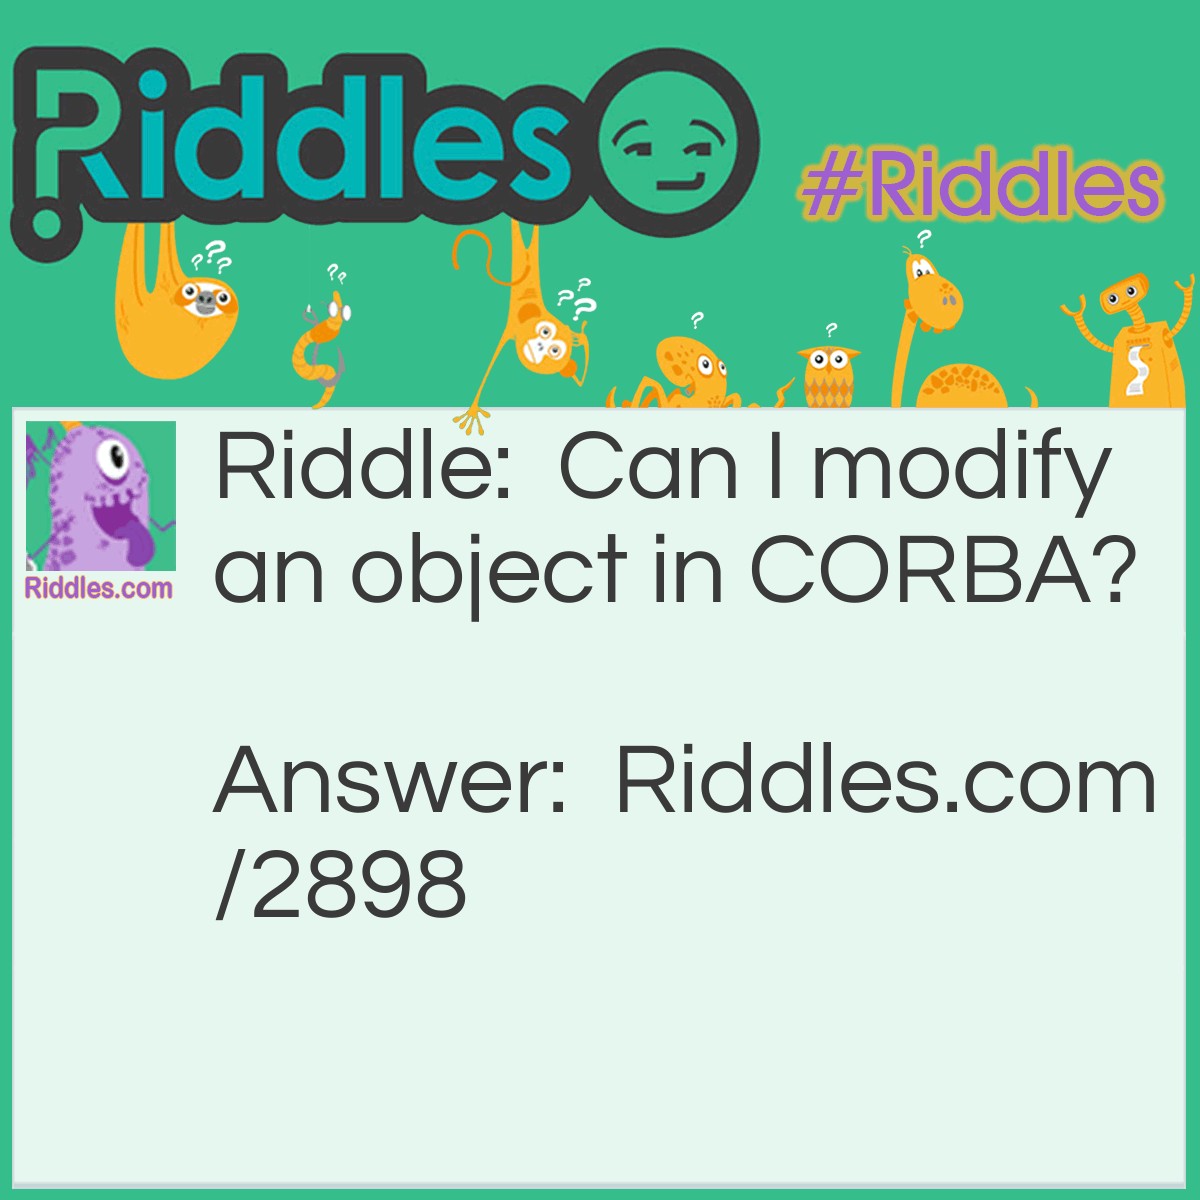 Riddle: Can I modify an object in CORBA? Answer: As you wish, I do not have any objections.